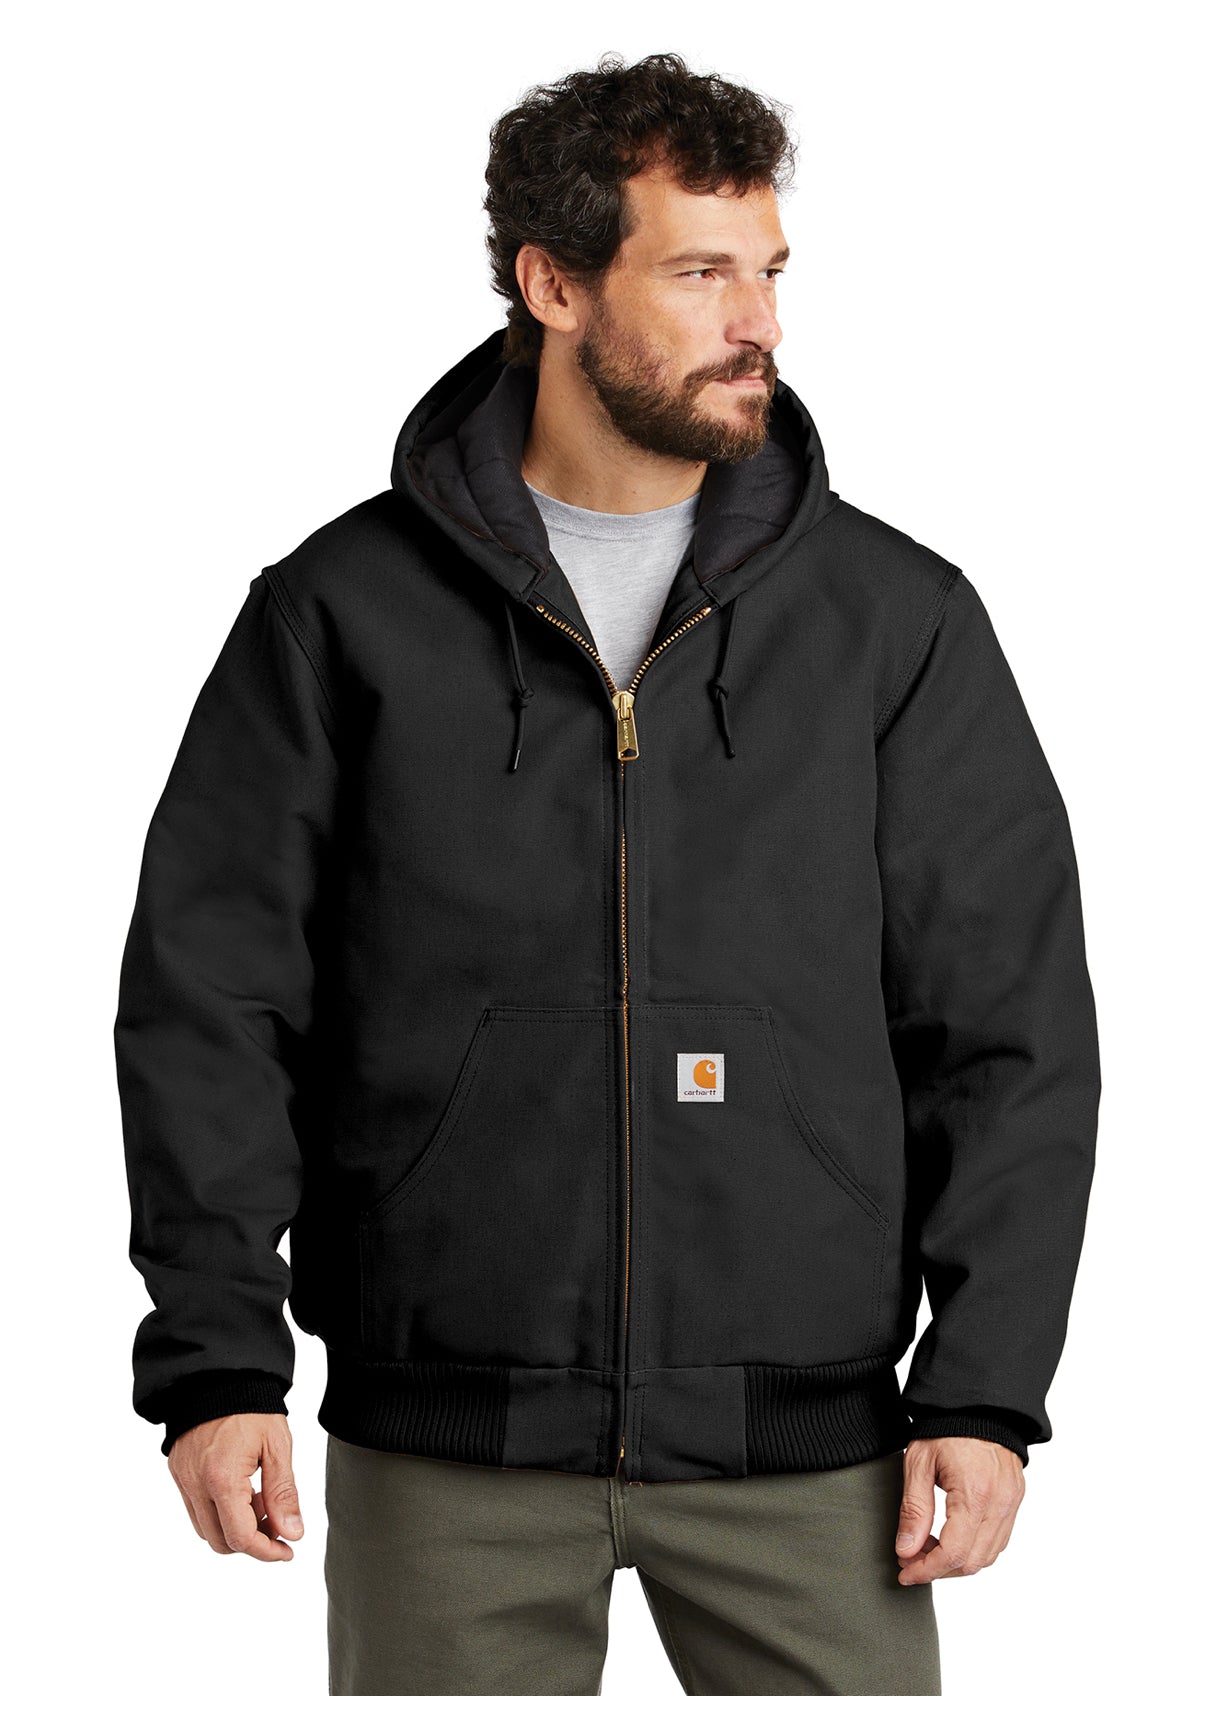 Project Airtime Carhartt Jacket